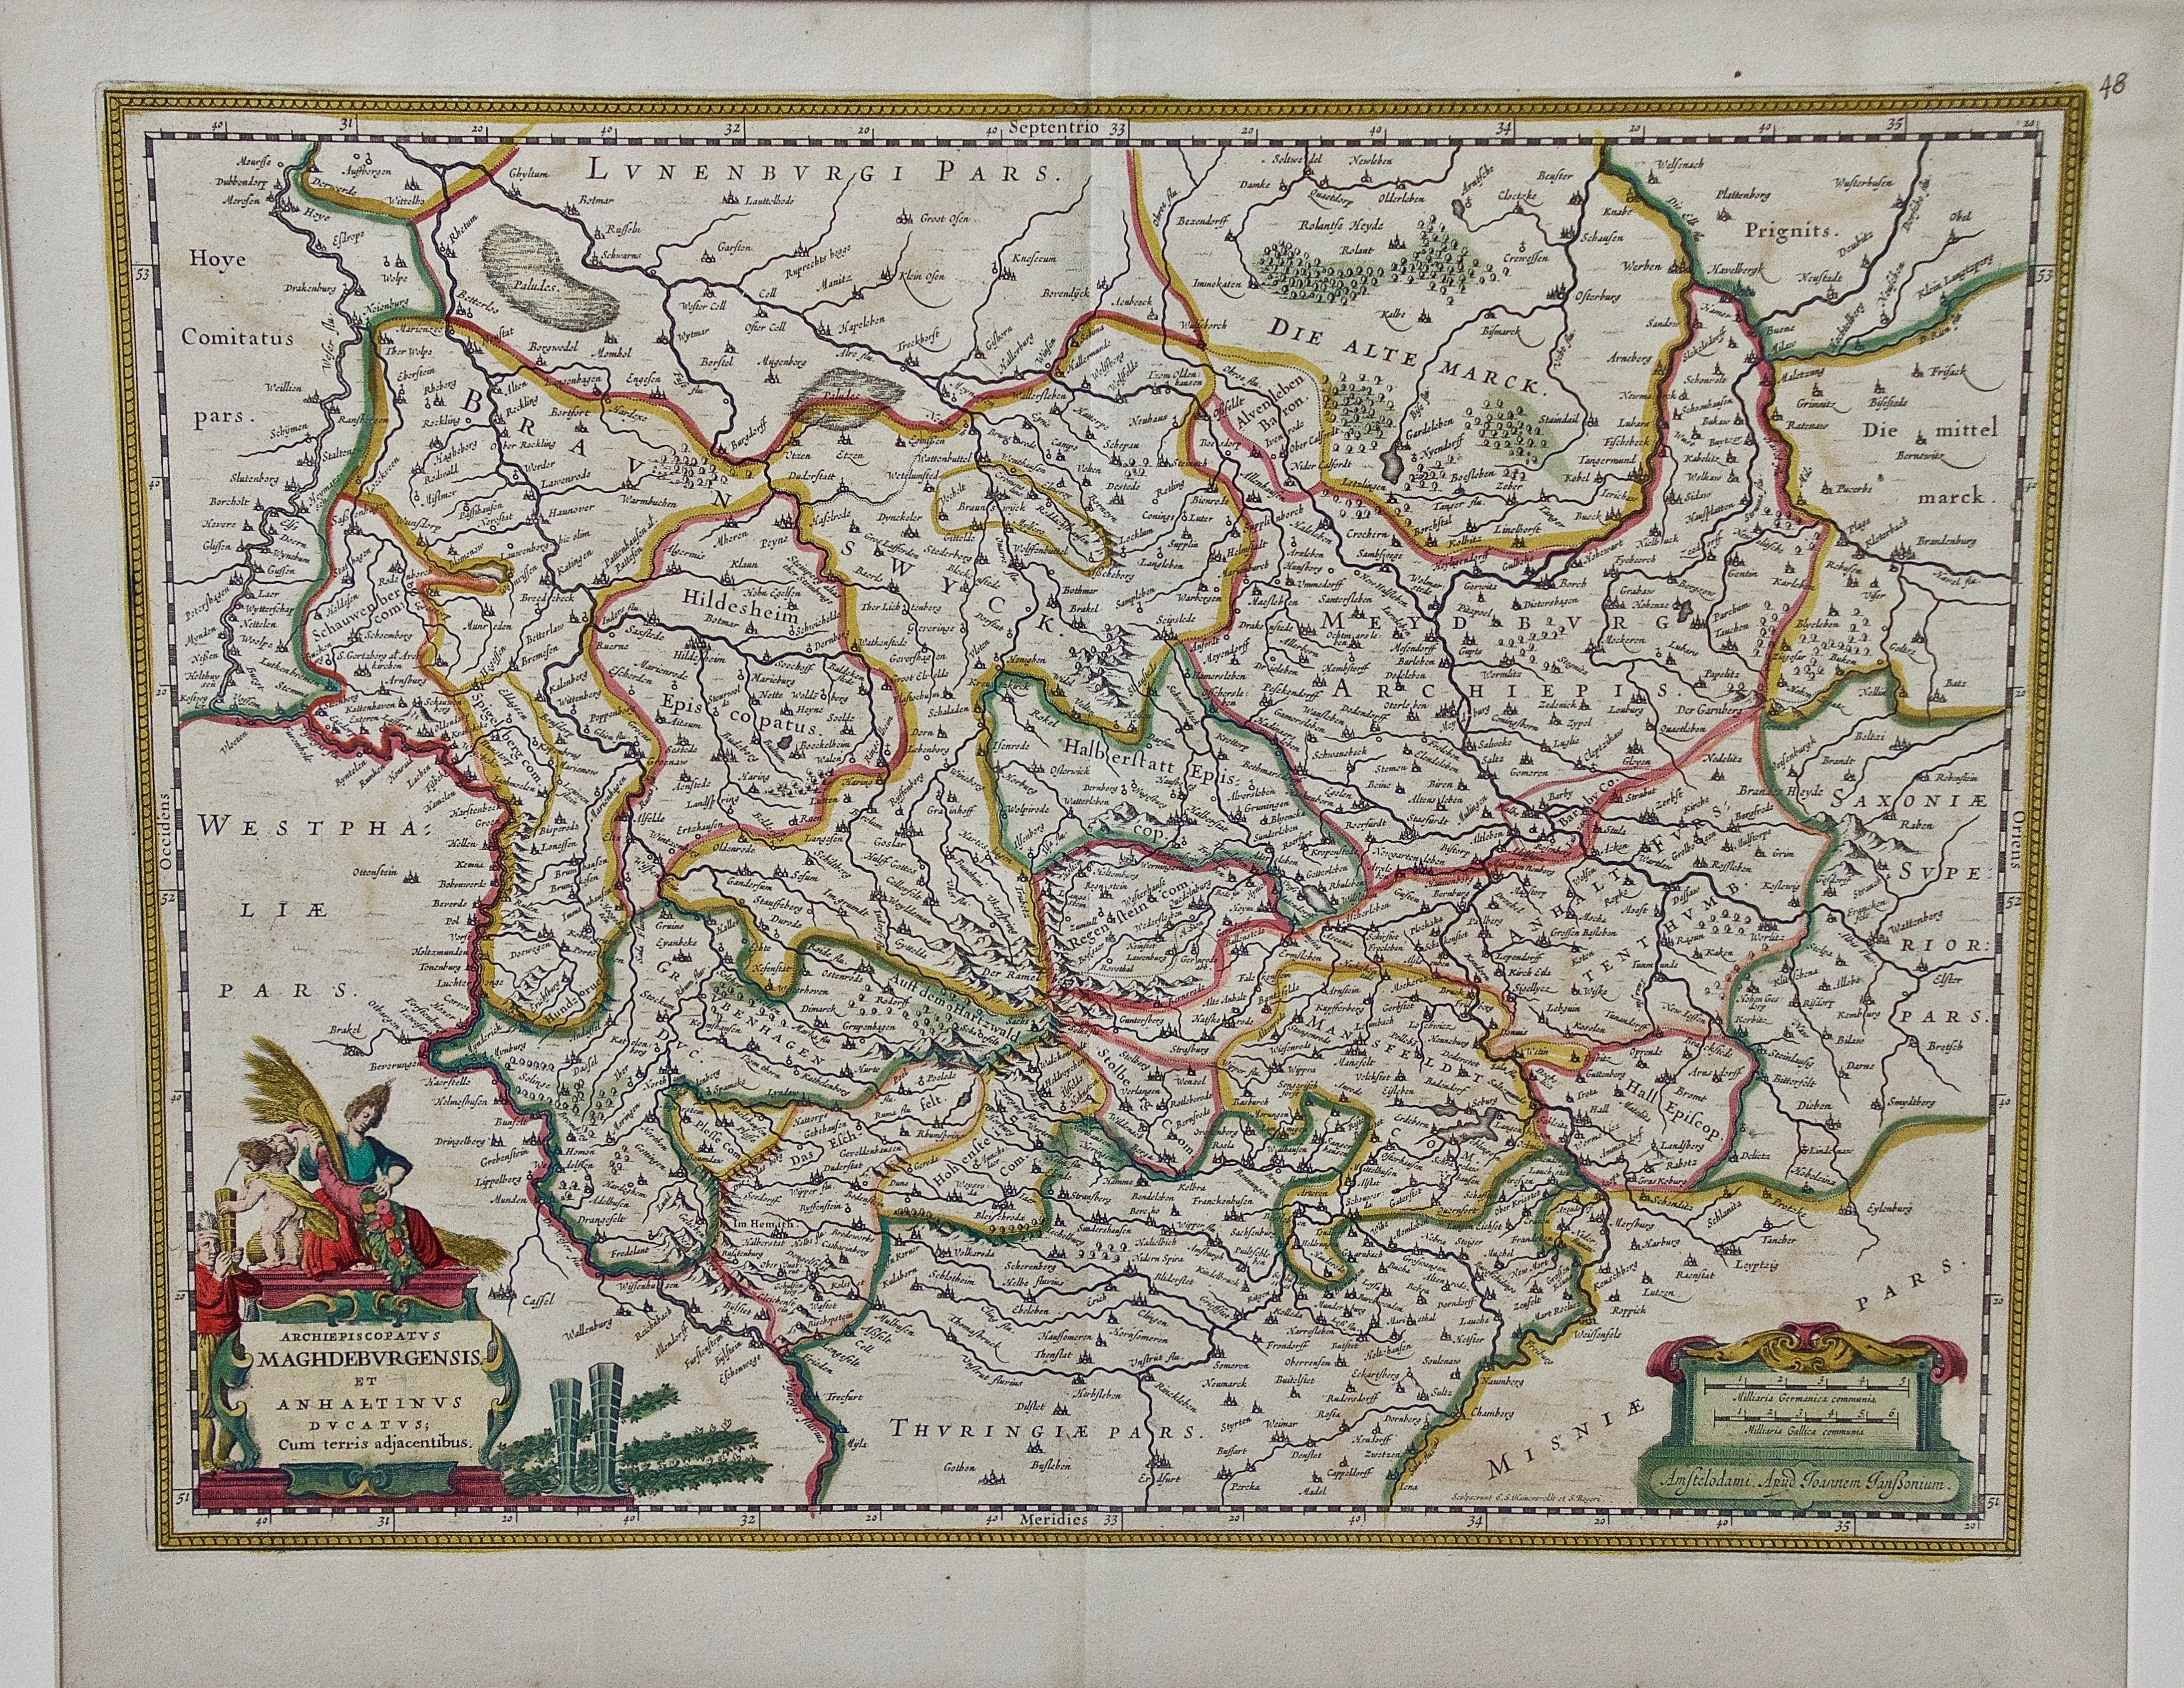 West Germany: Original Hand Colored 17th Century Map by Johannes Janssonius